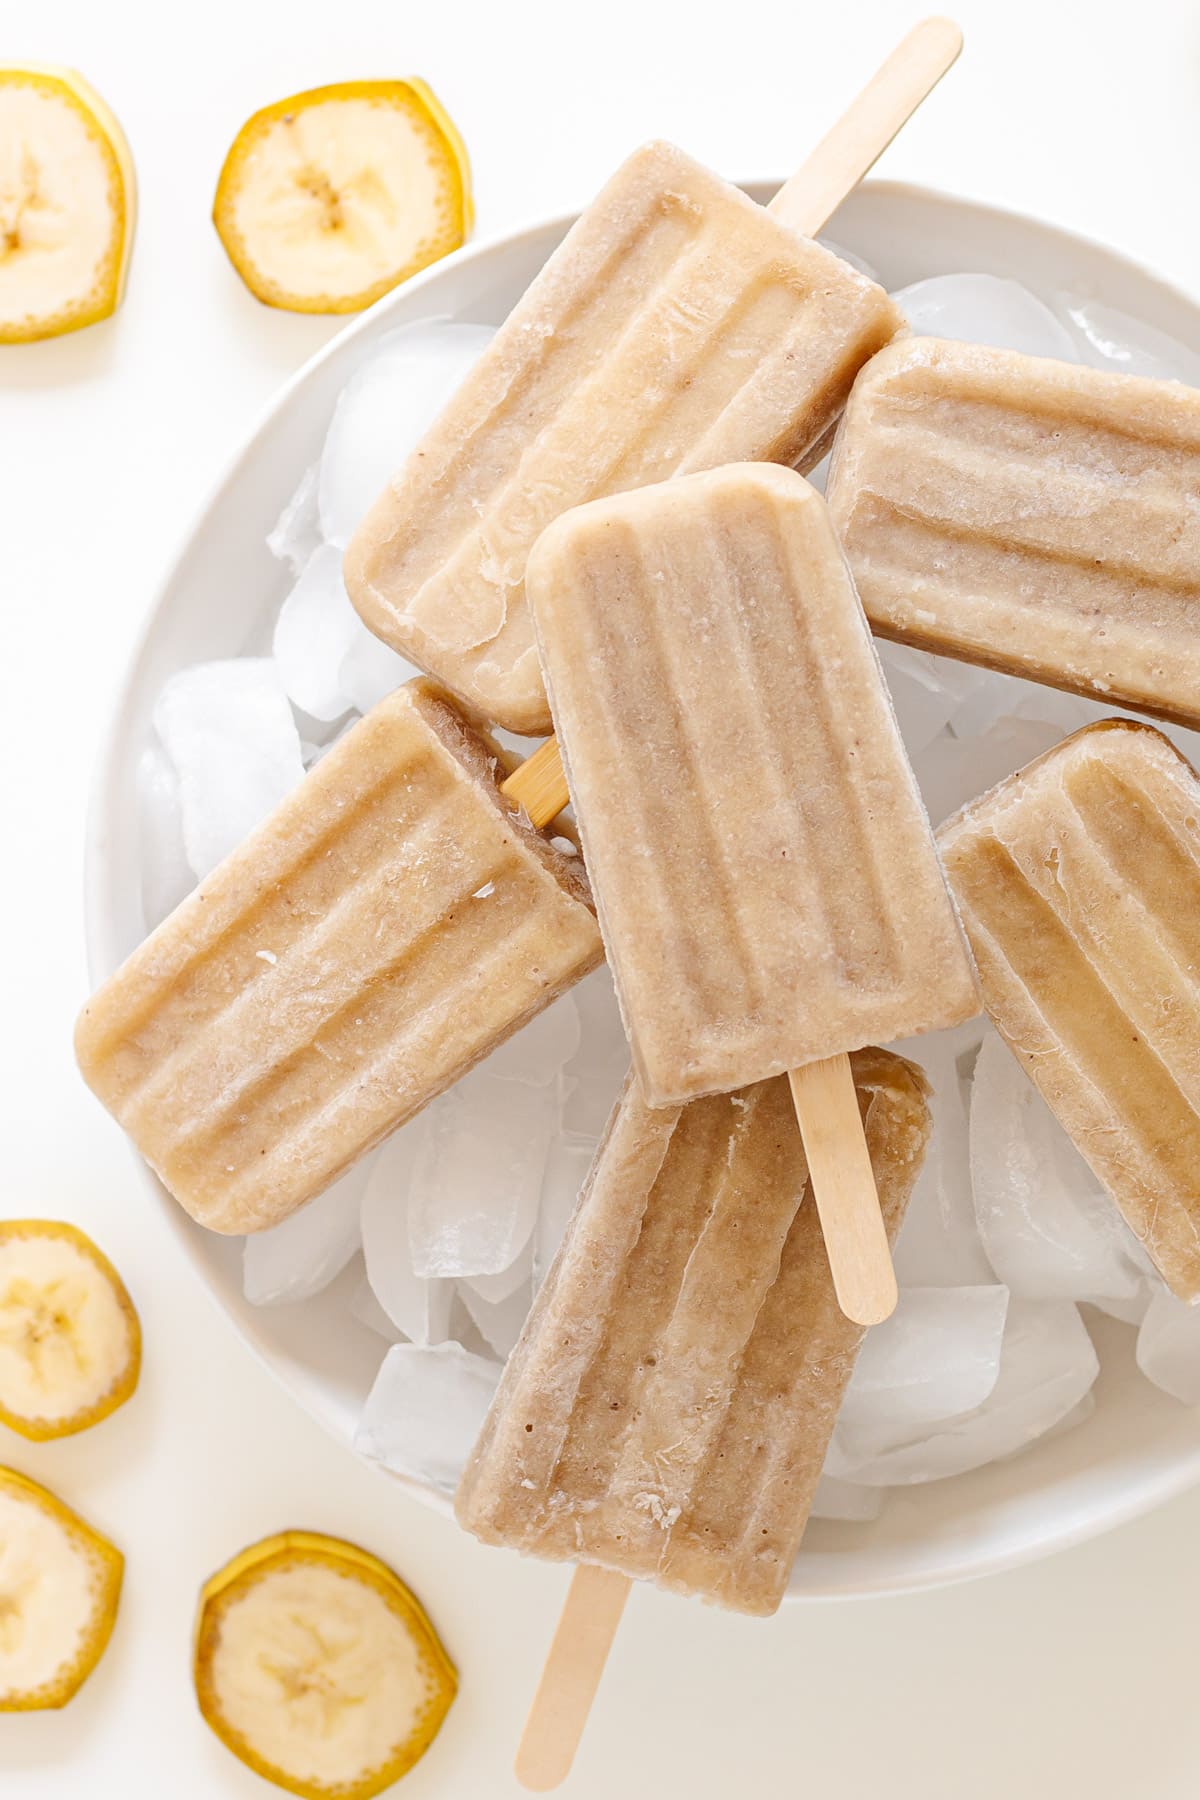 Banana popsicles sitting on a round white platter of ice cubes with slices of banana beside it.